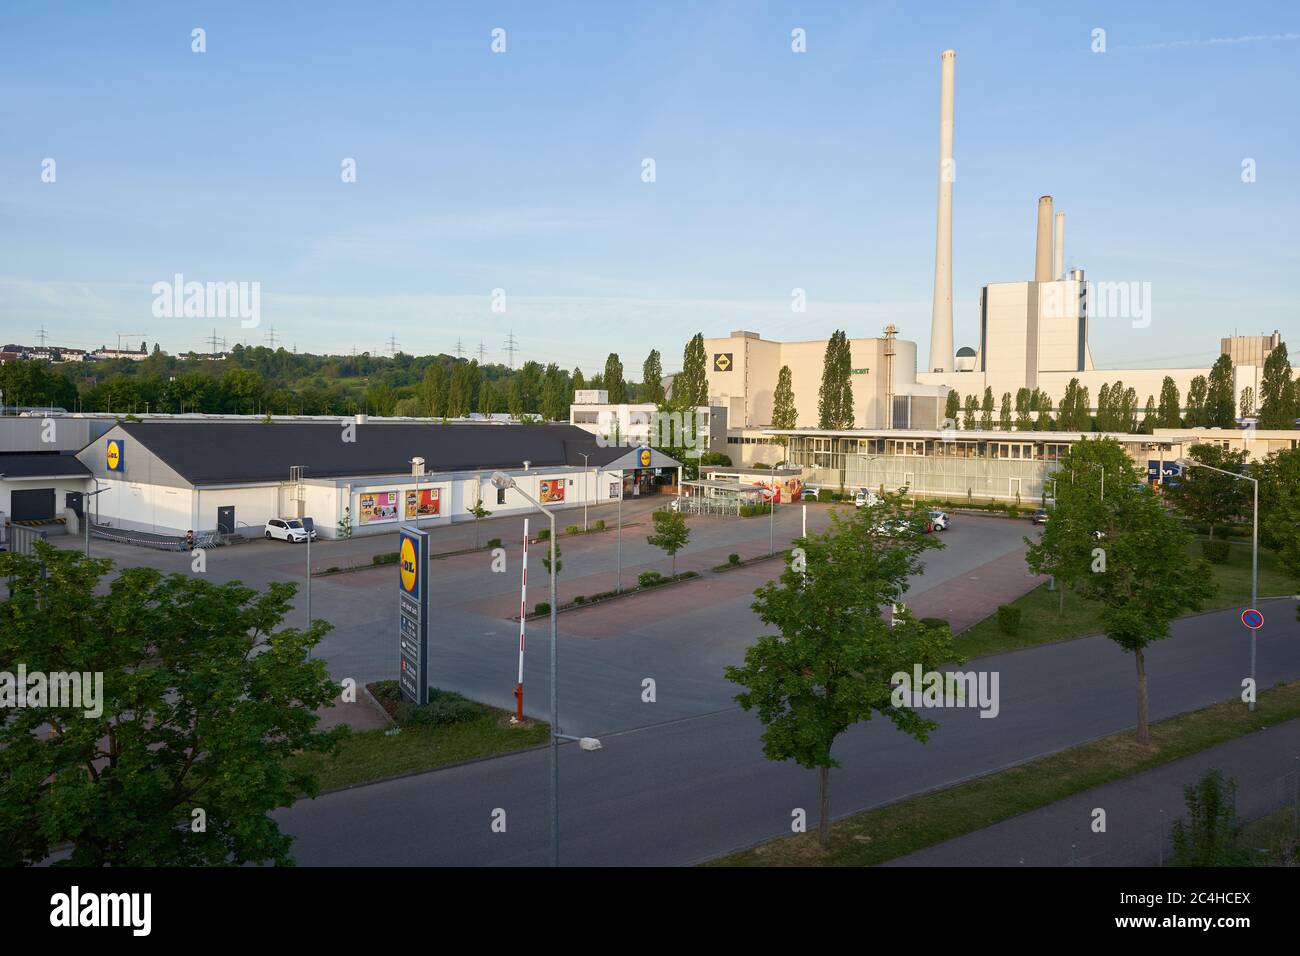 Altbach, Germany - May 08, 2020: The Altbach / Deizisau thermal power station is a hard coal-fired power station in Baden-Wuerttemberg. Stock Photo